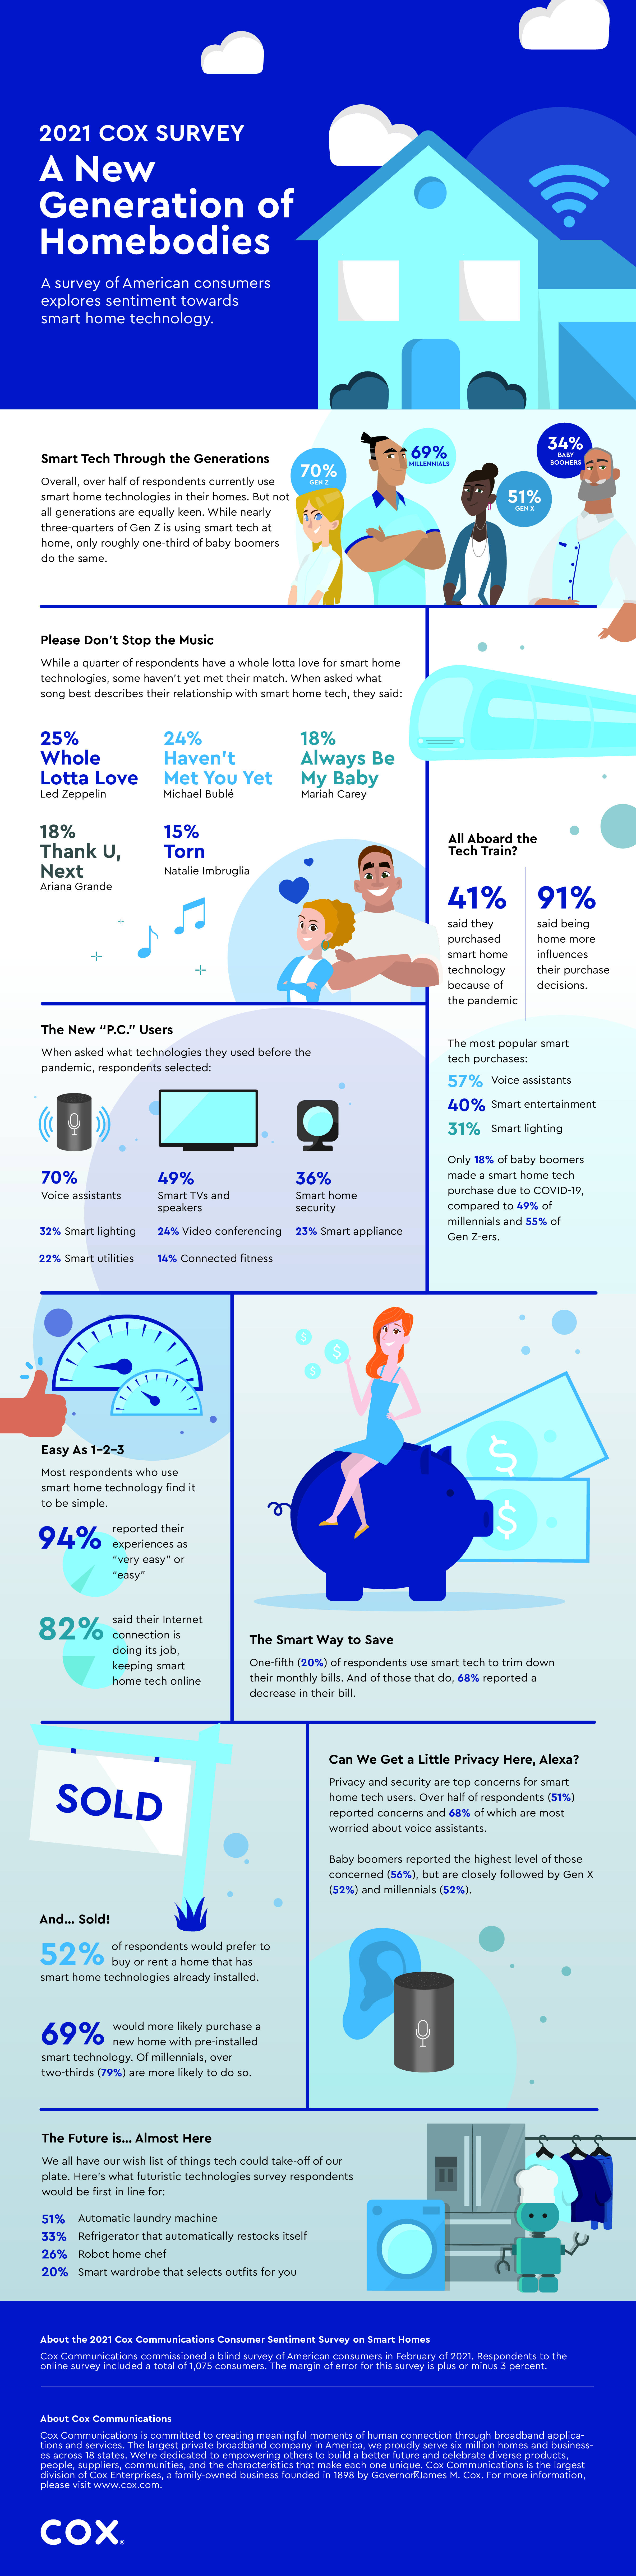 Cox Smart Home Infographic